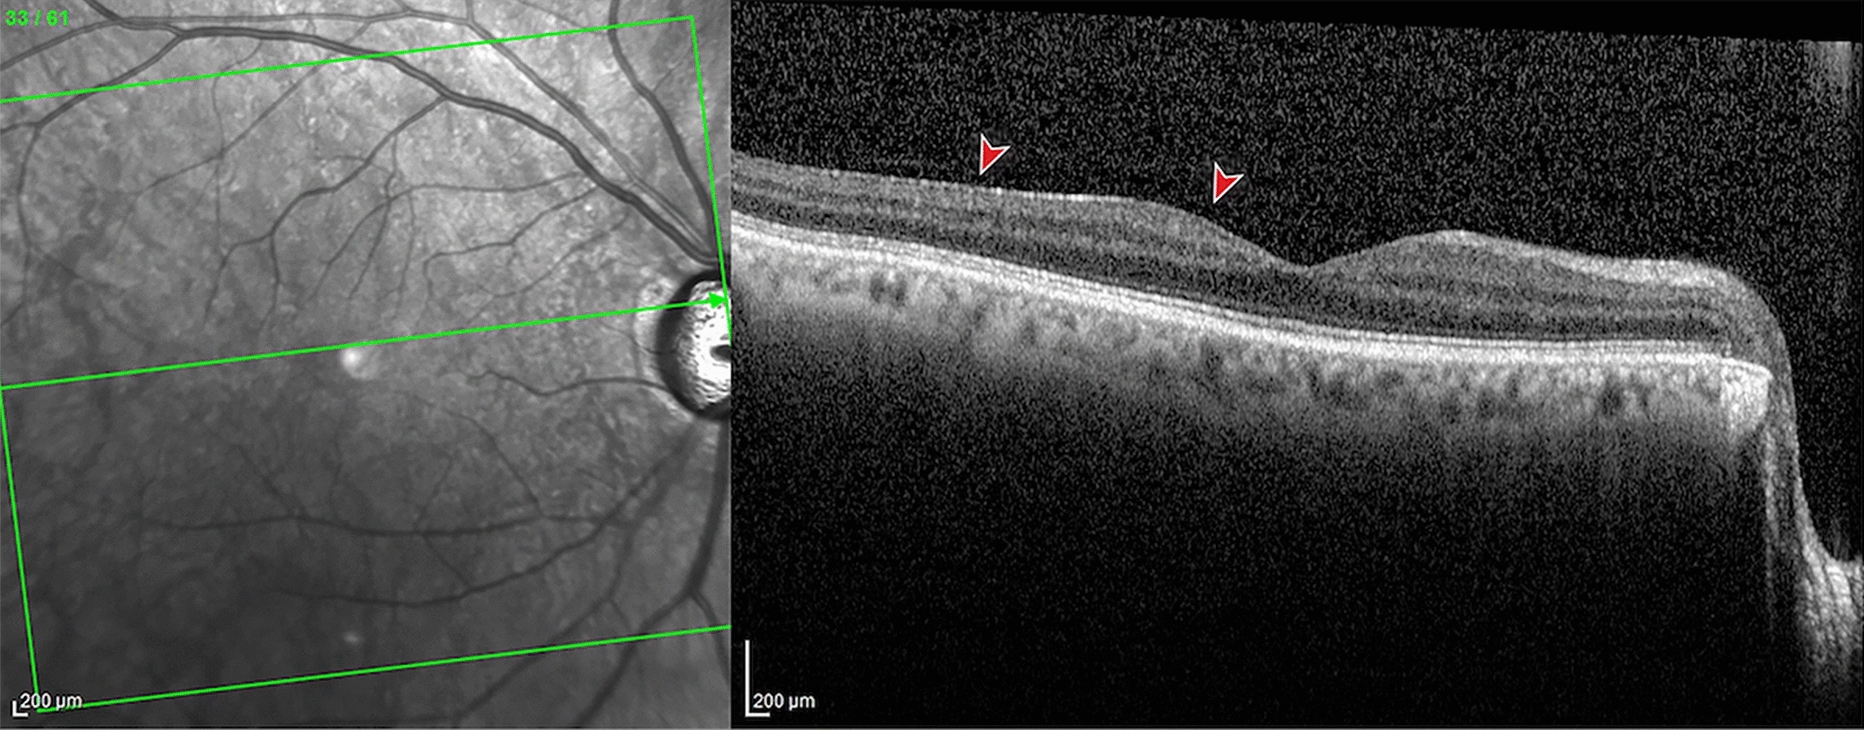 Epiretinal membrane development after Ex-Press glaucoma filtration device implant: 2-year results of a case control study